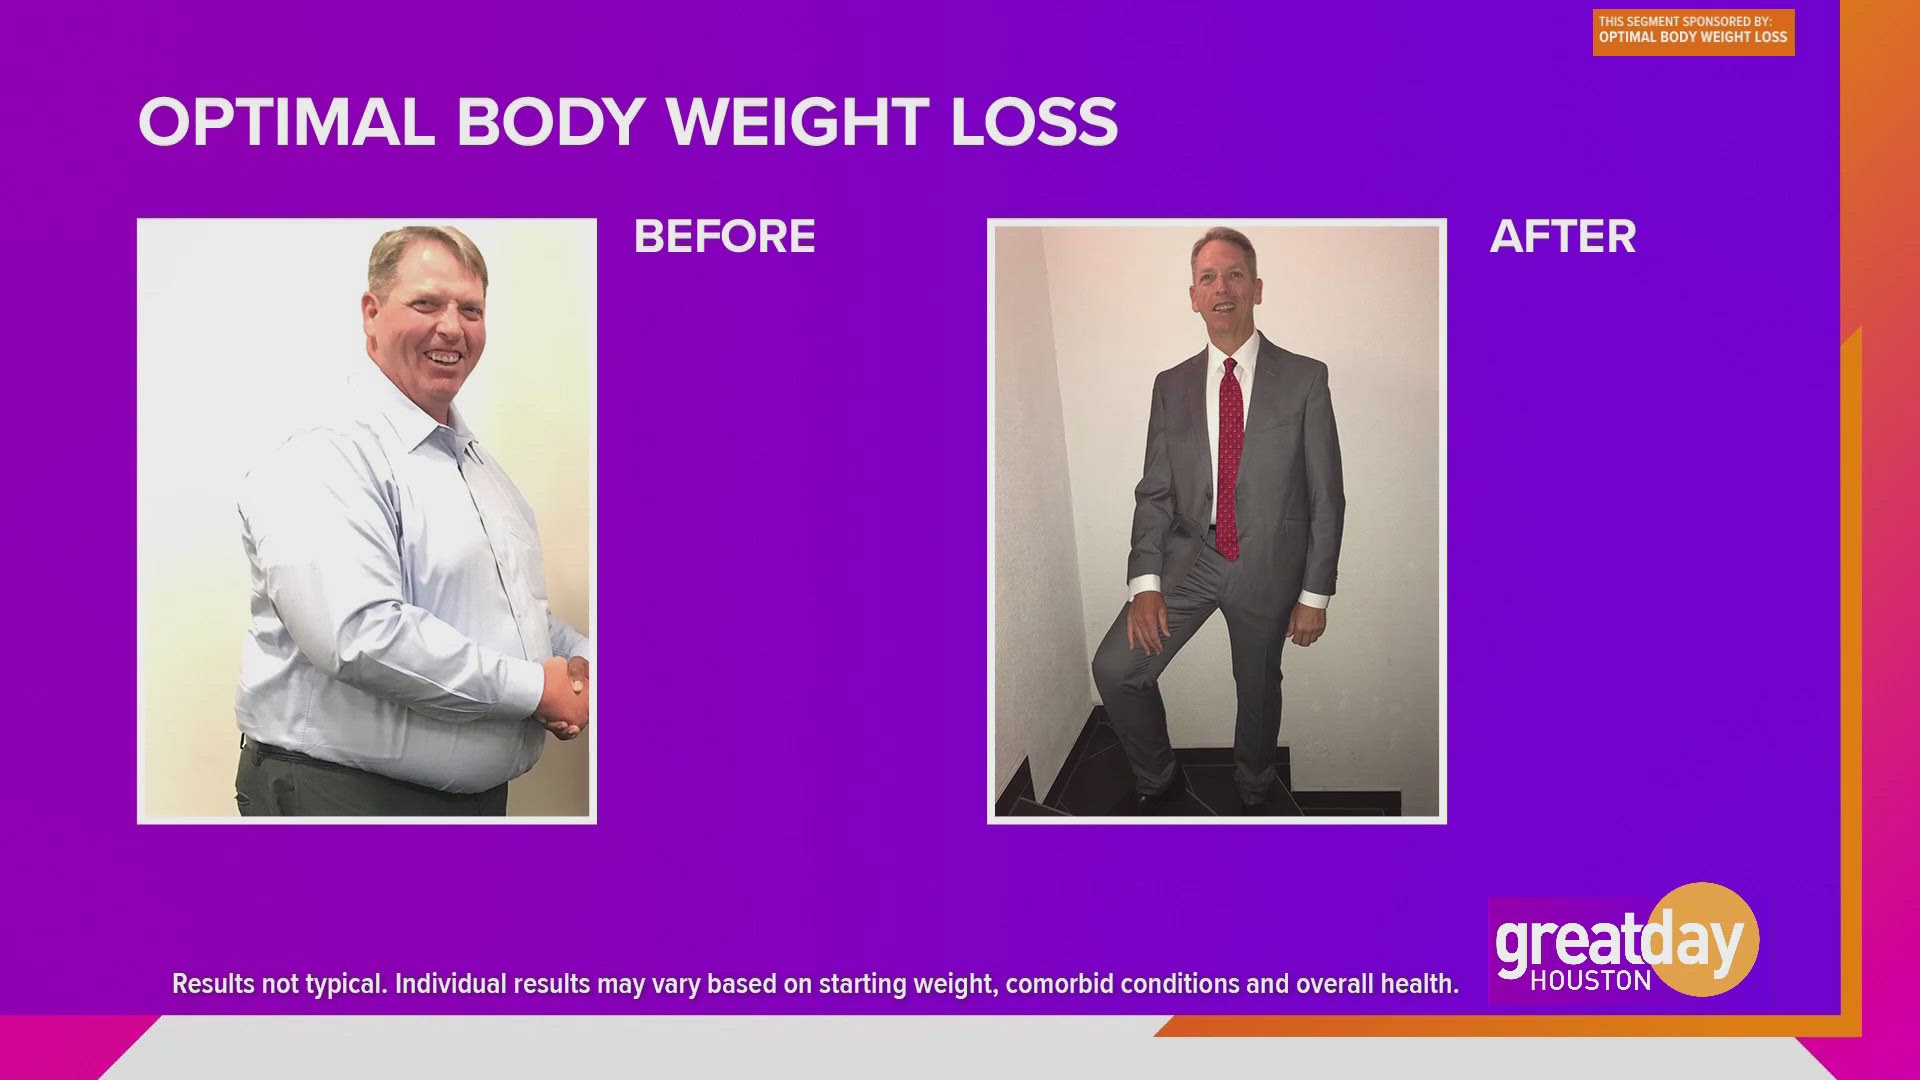 Dr. Cory Aplin from Optimal Body Weight Loss explains hypothyroidism